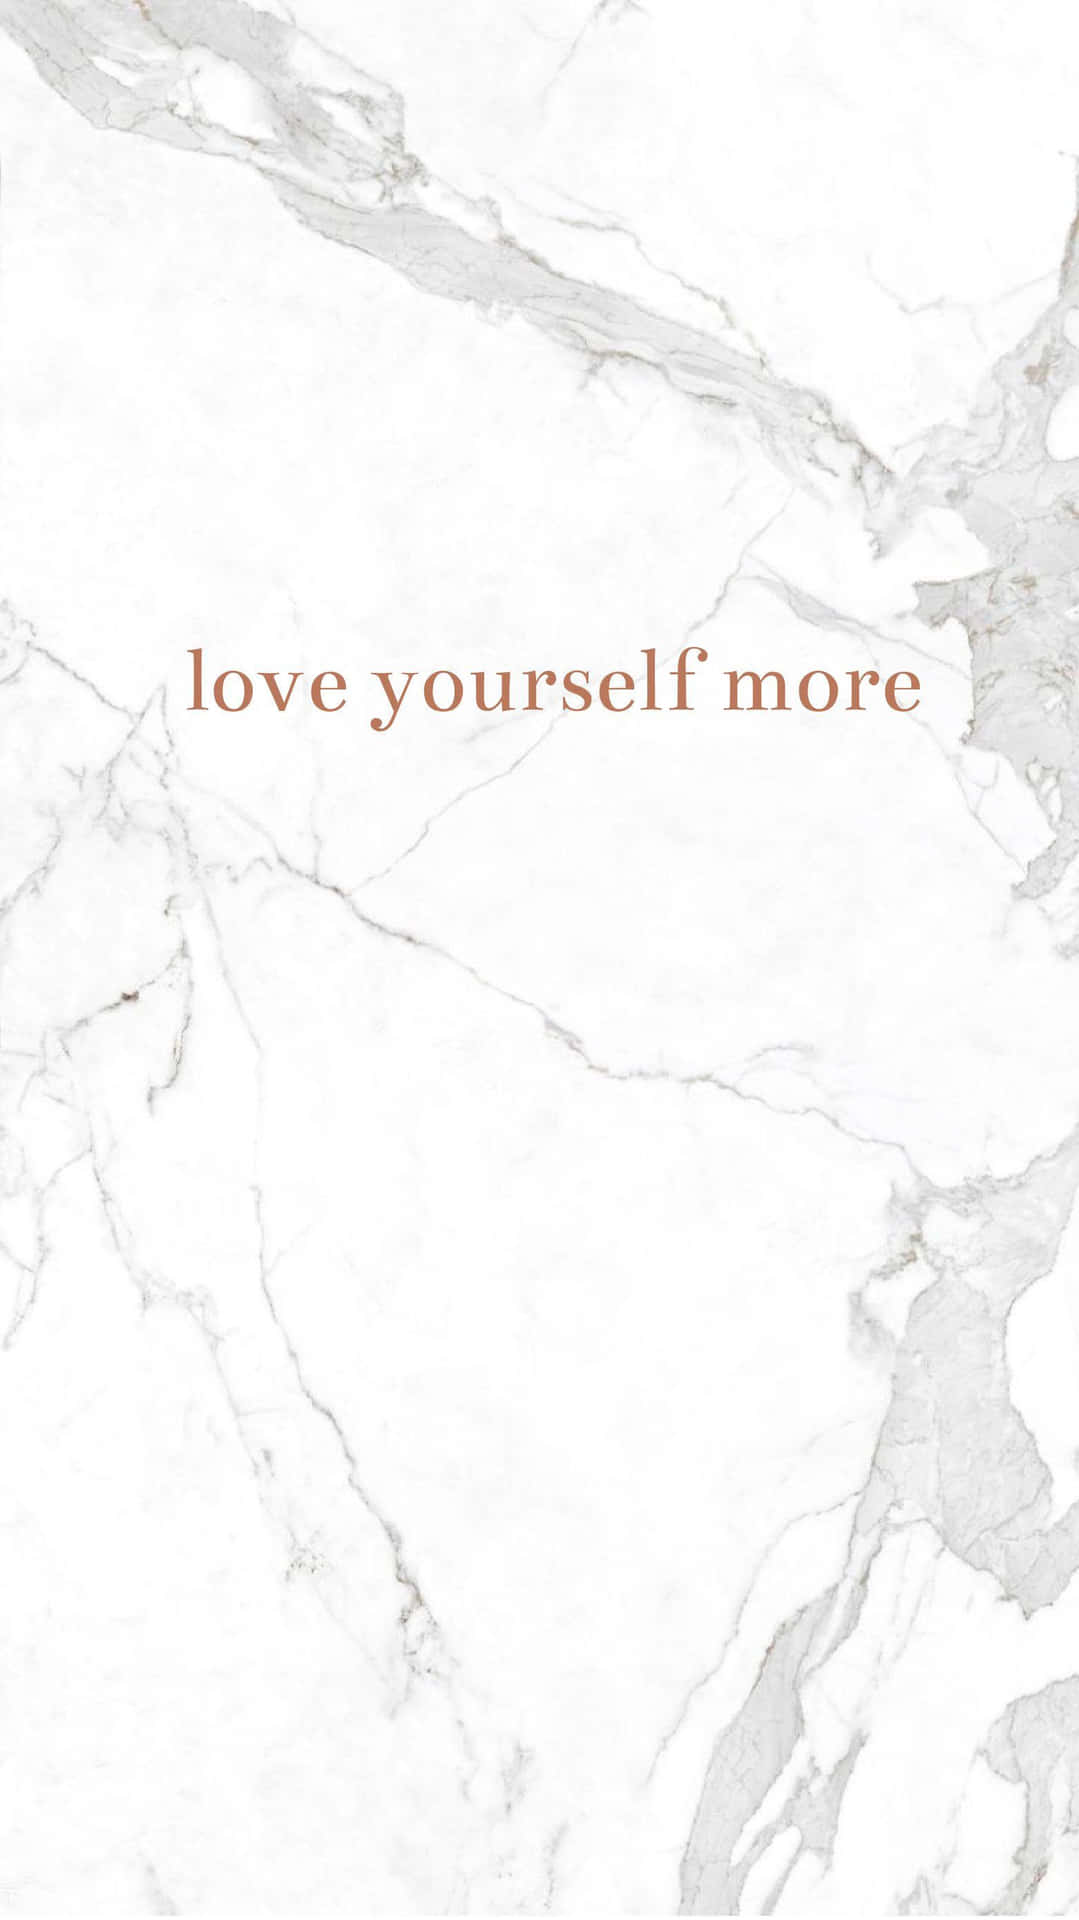 Take Time To Love Yourself